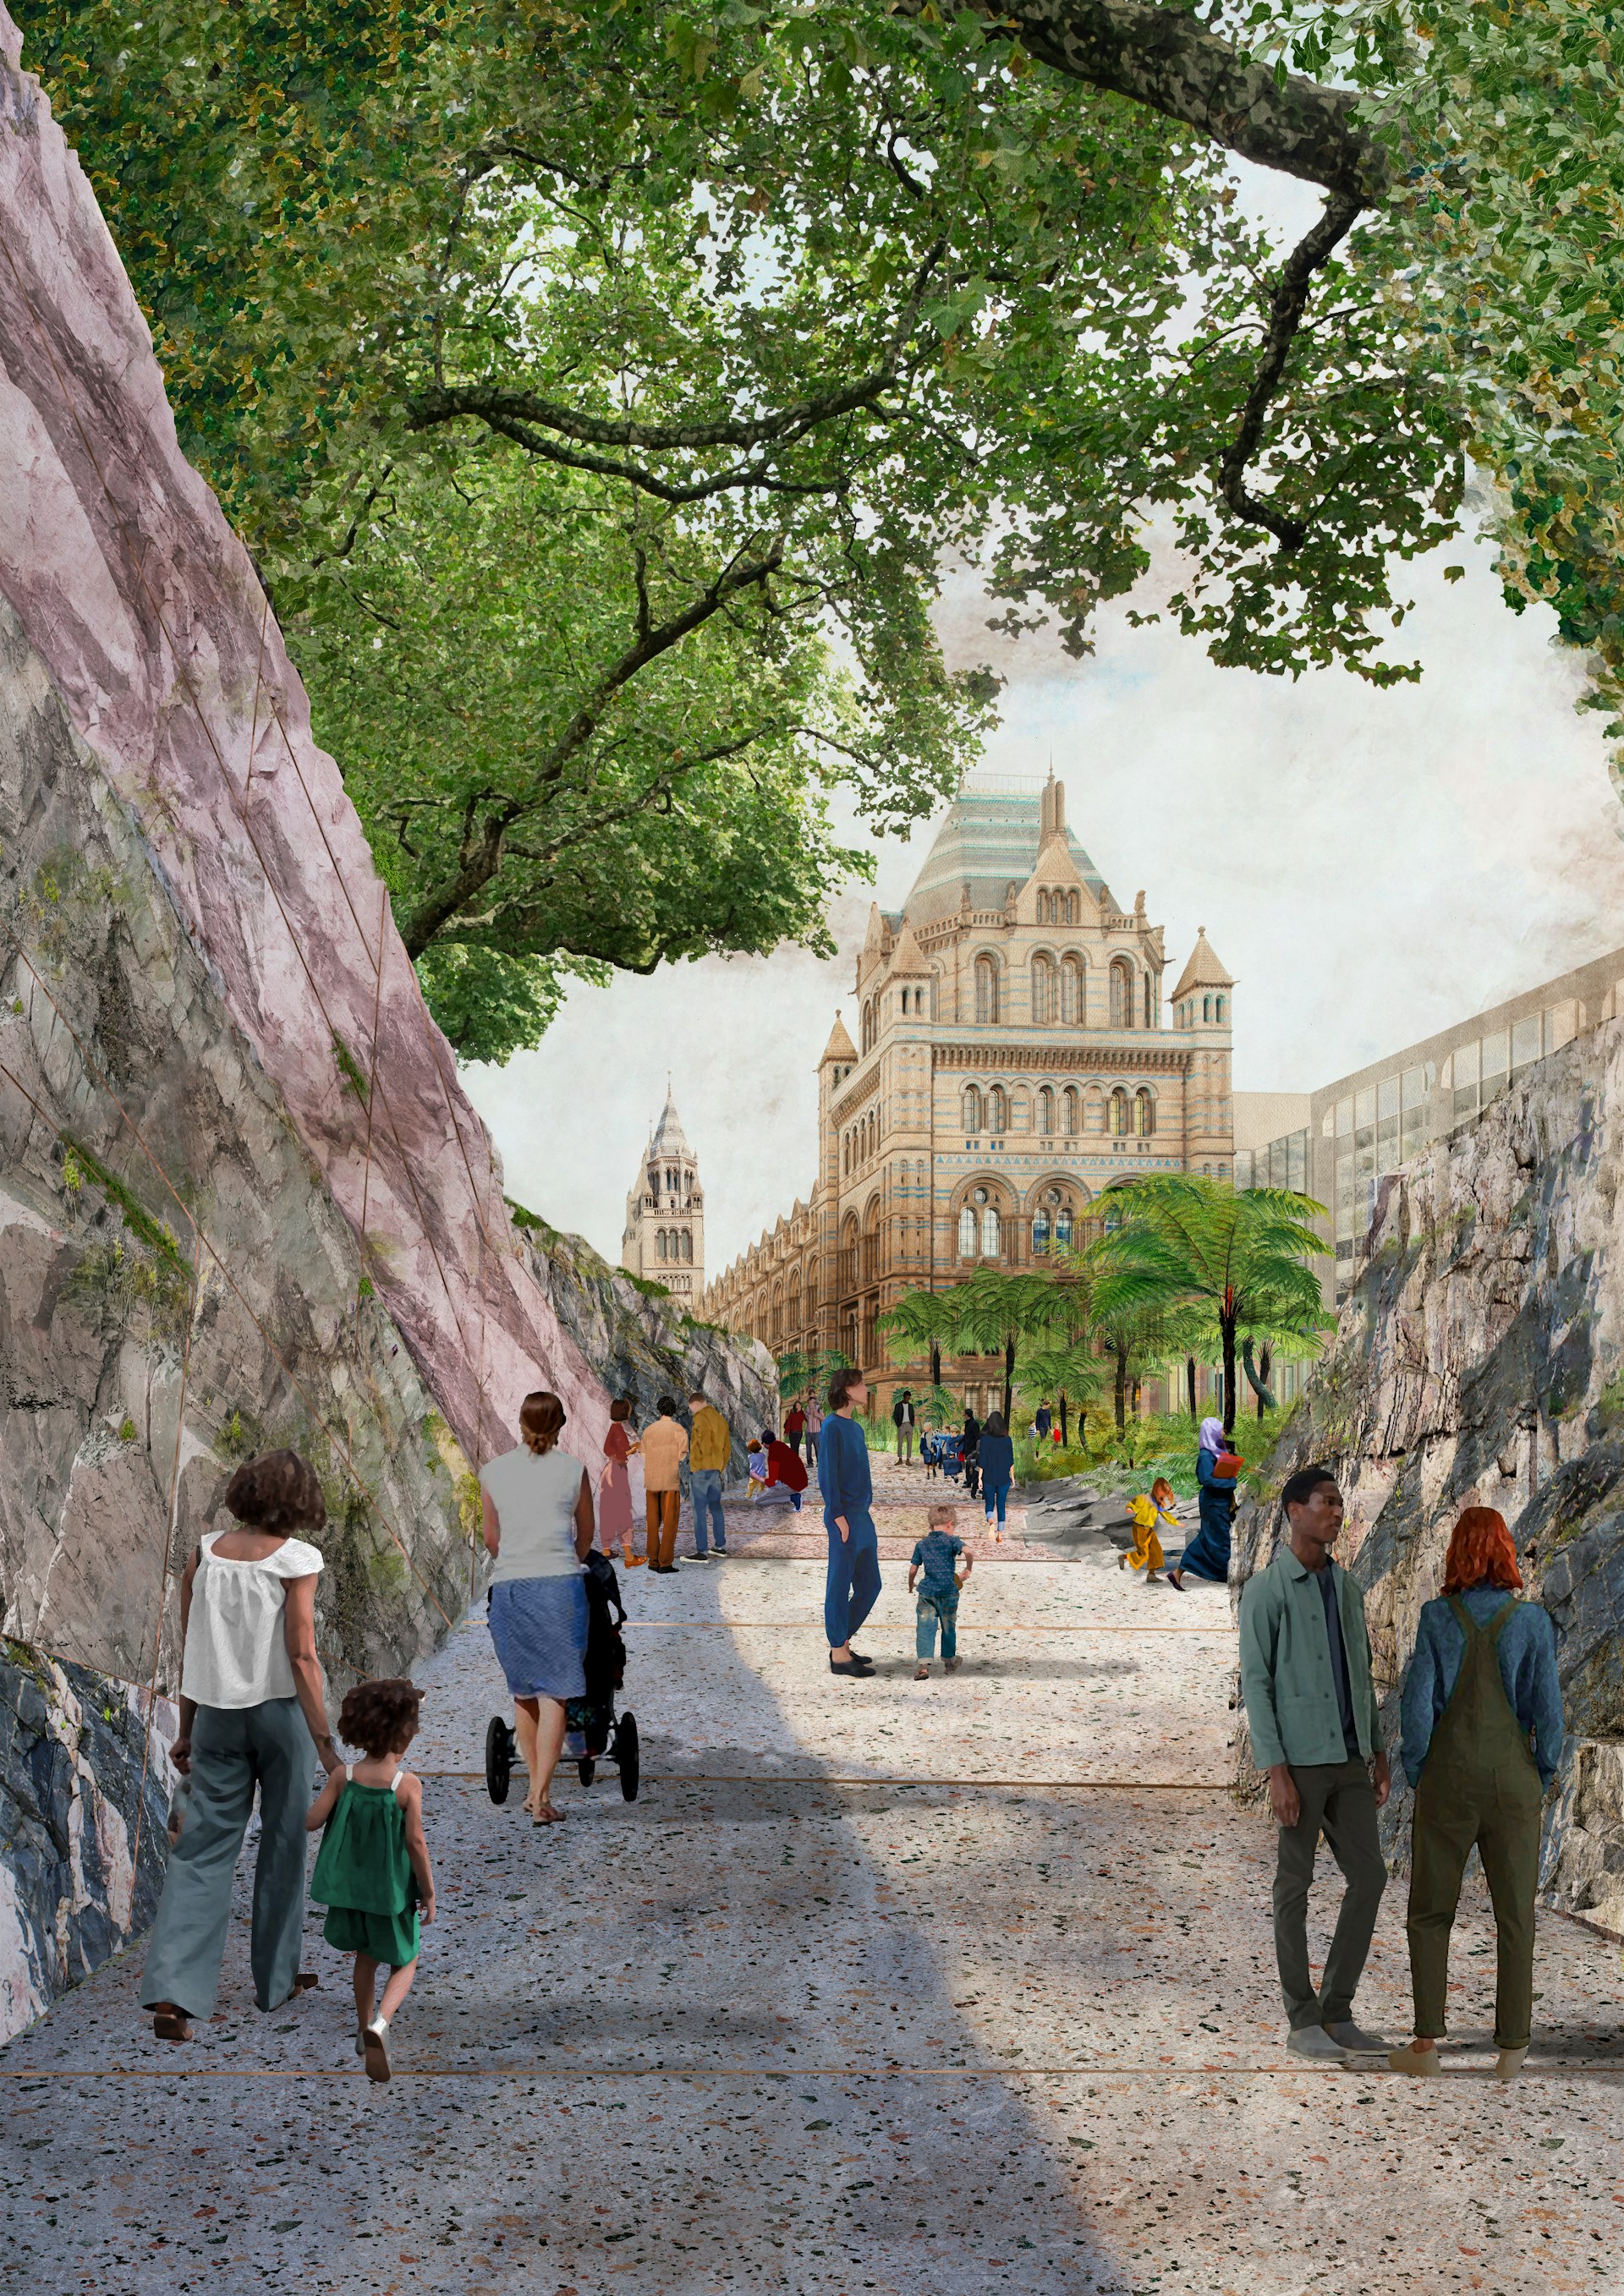 Illustration of Royal Academy Garden at Natural History Museum